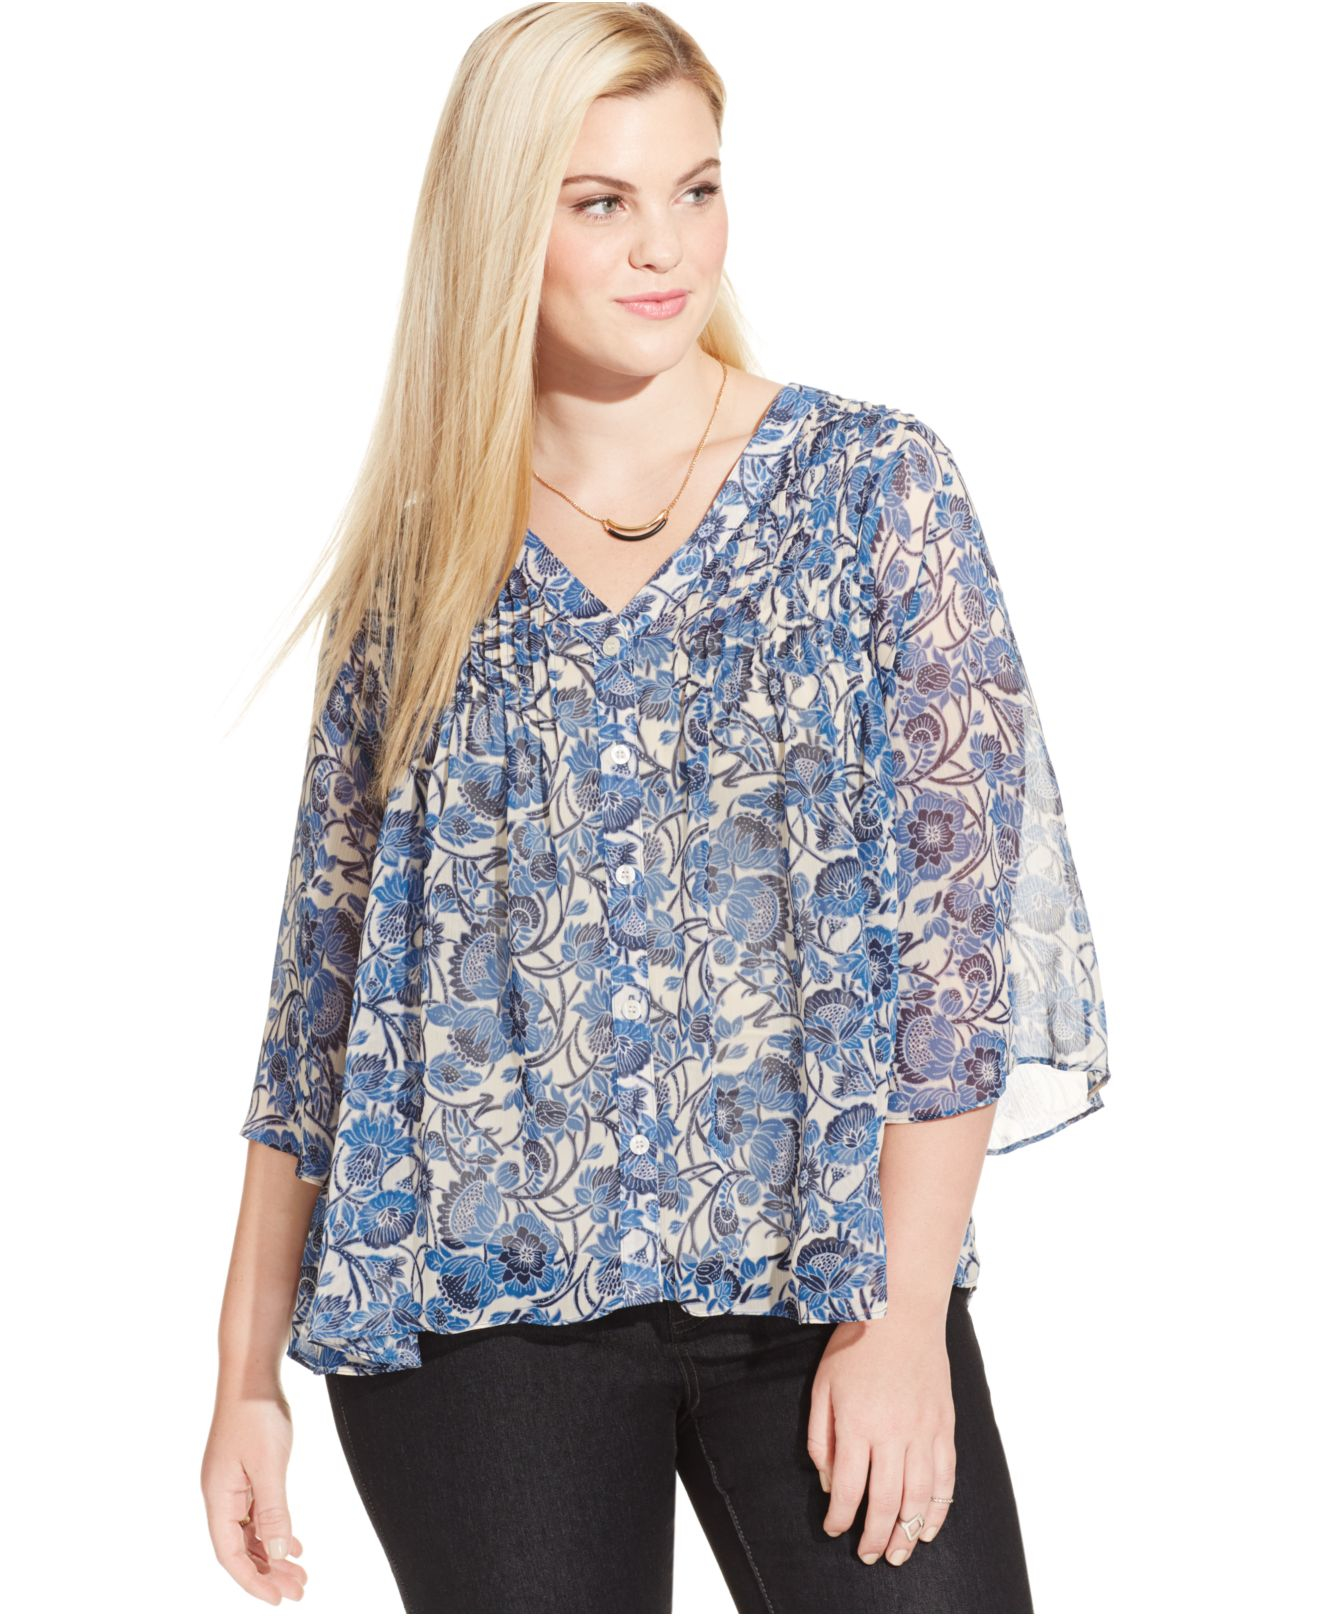 Lyst - Jessica Simpson Plus Size Floral-print Chiffon Peasant Blouse in ...